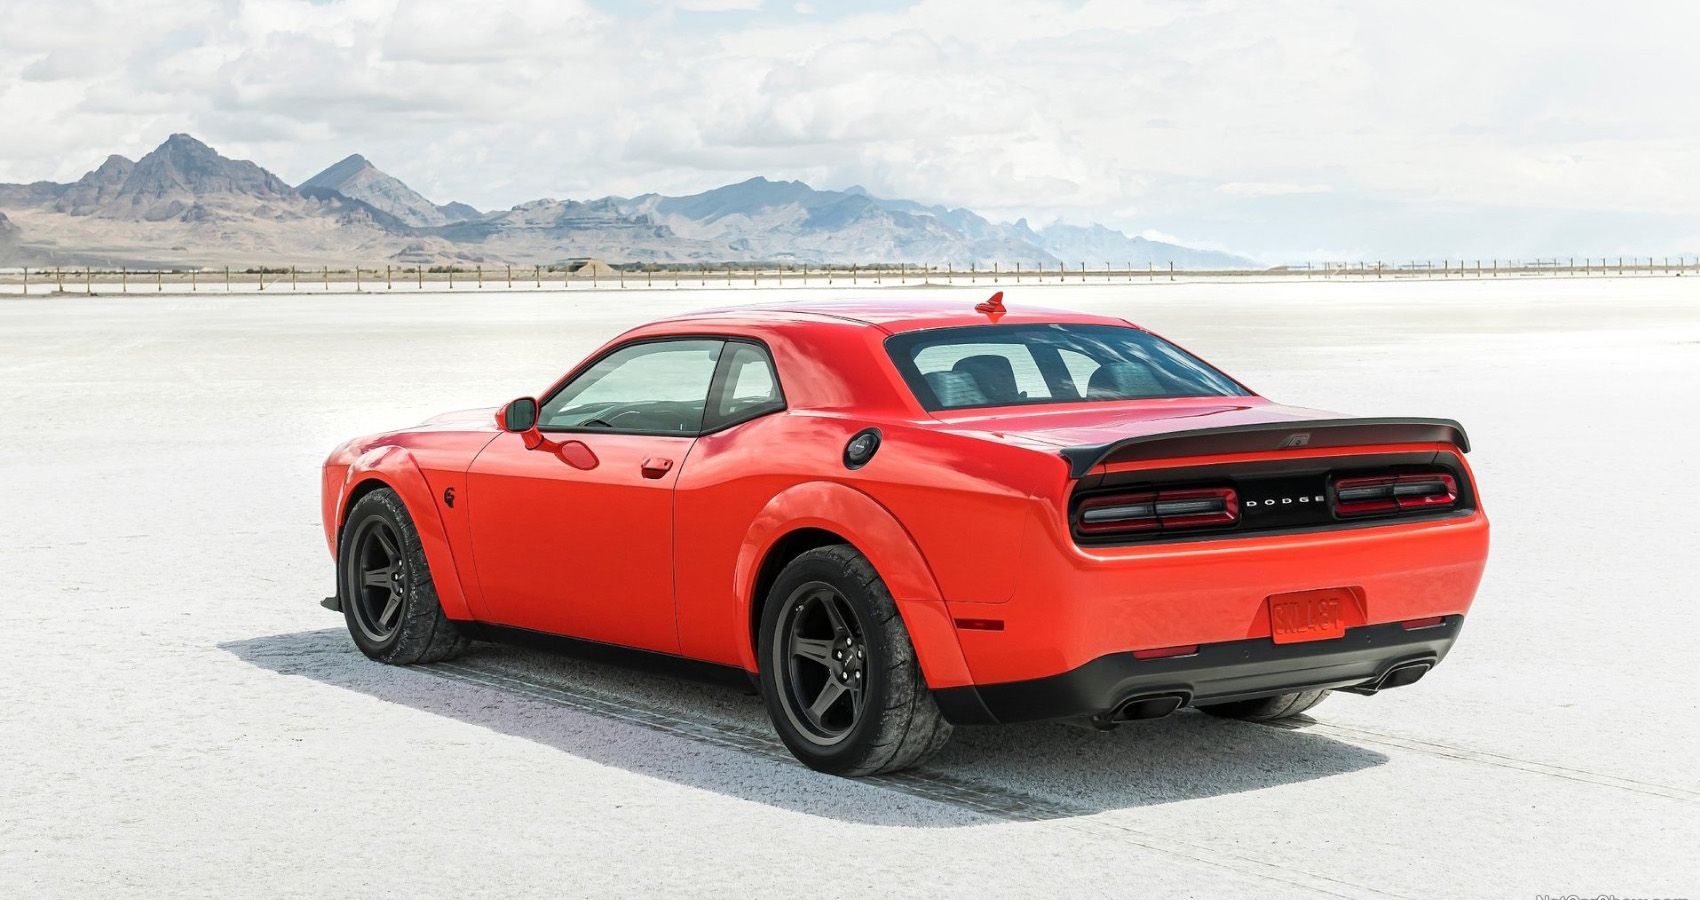 2020 Dodge Challenger SRT Super Stock in red rear view